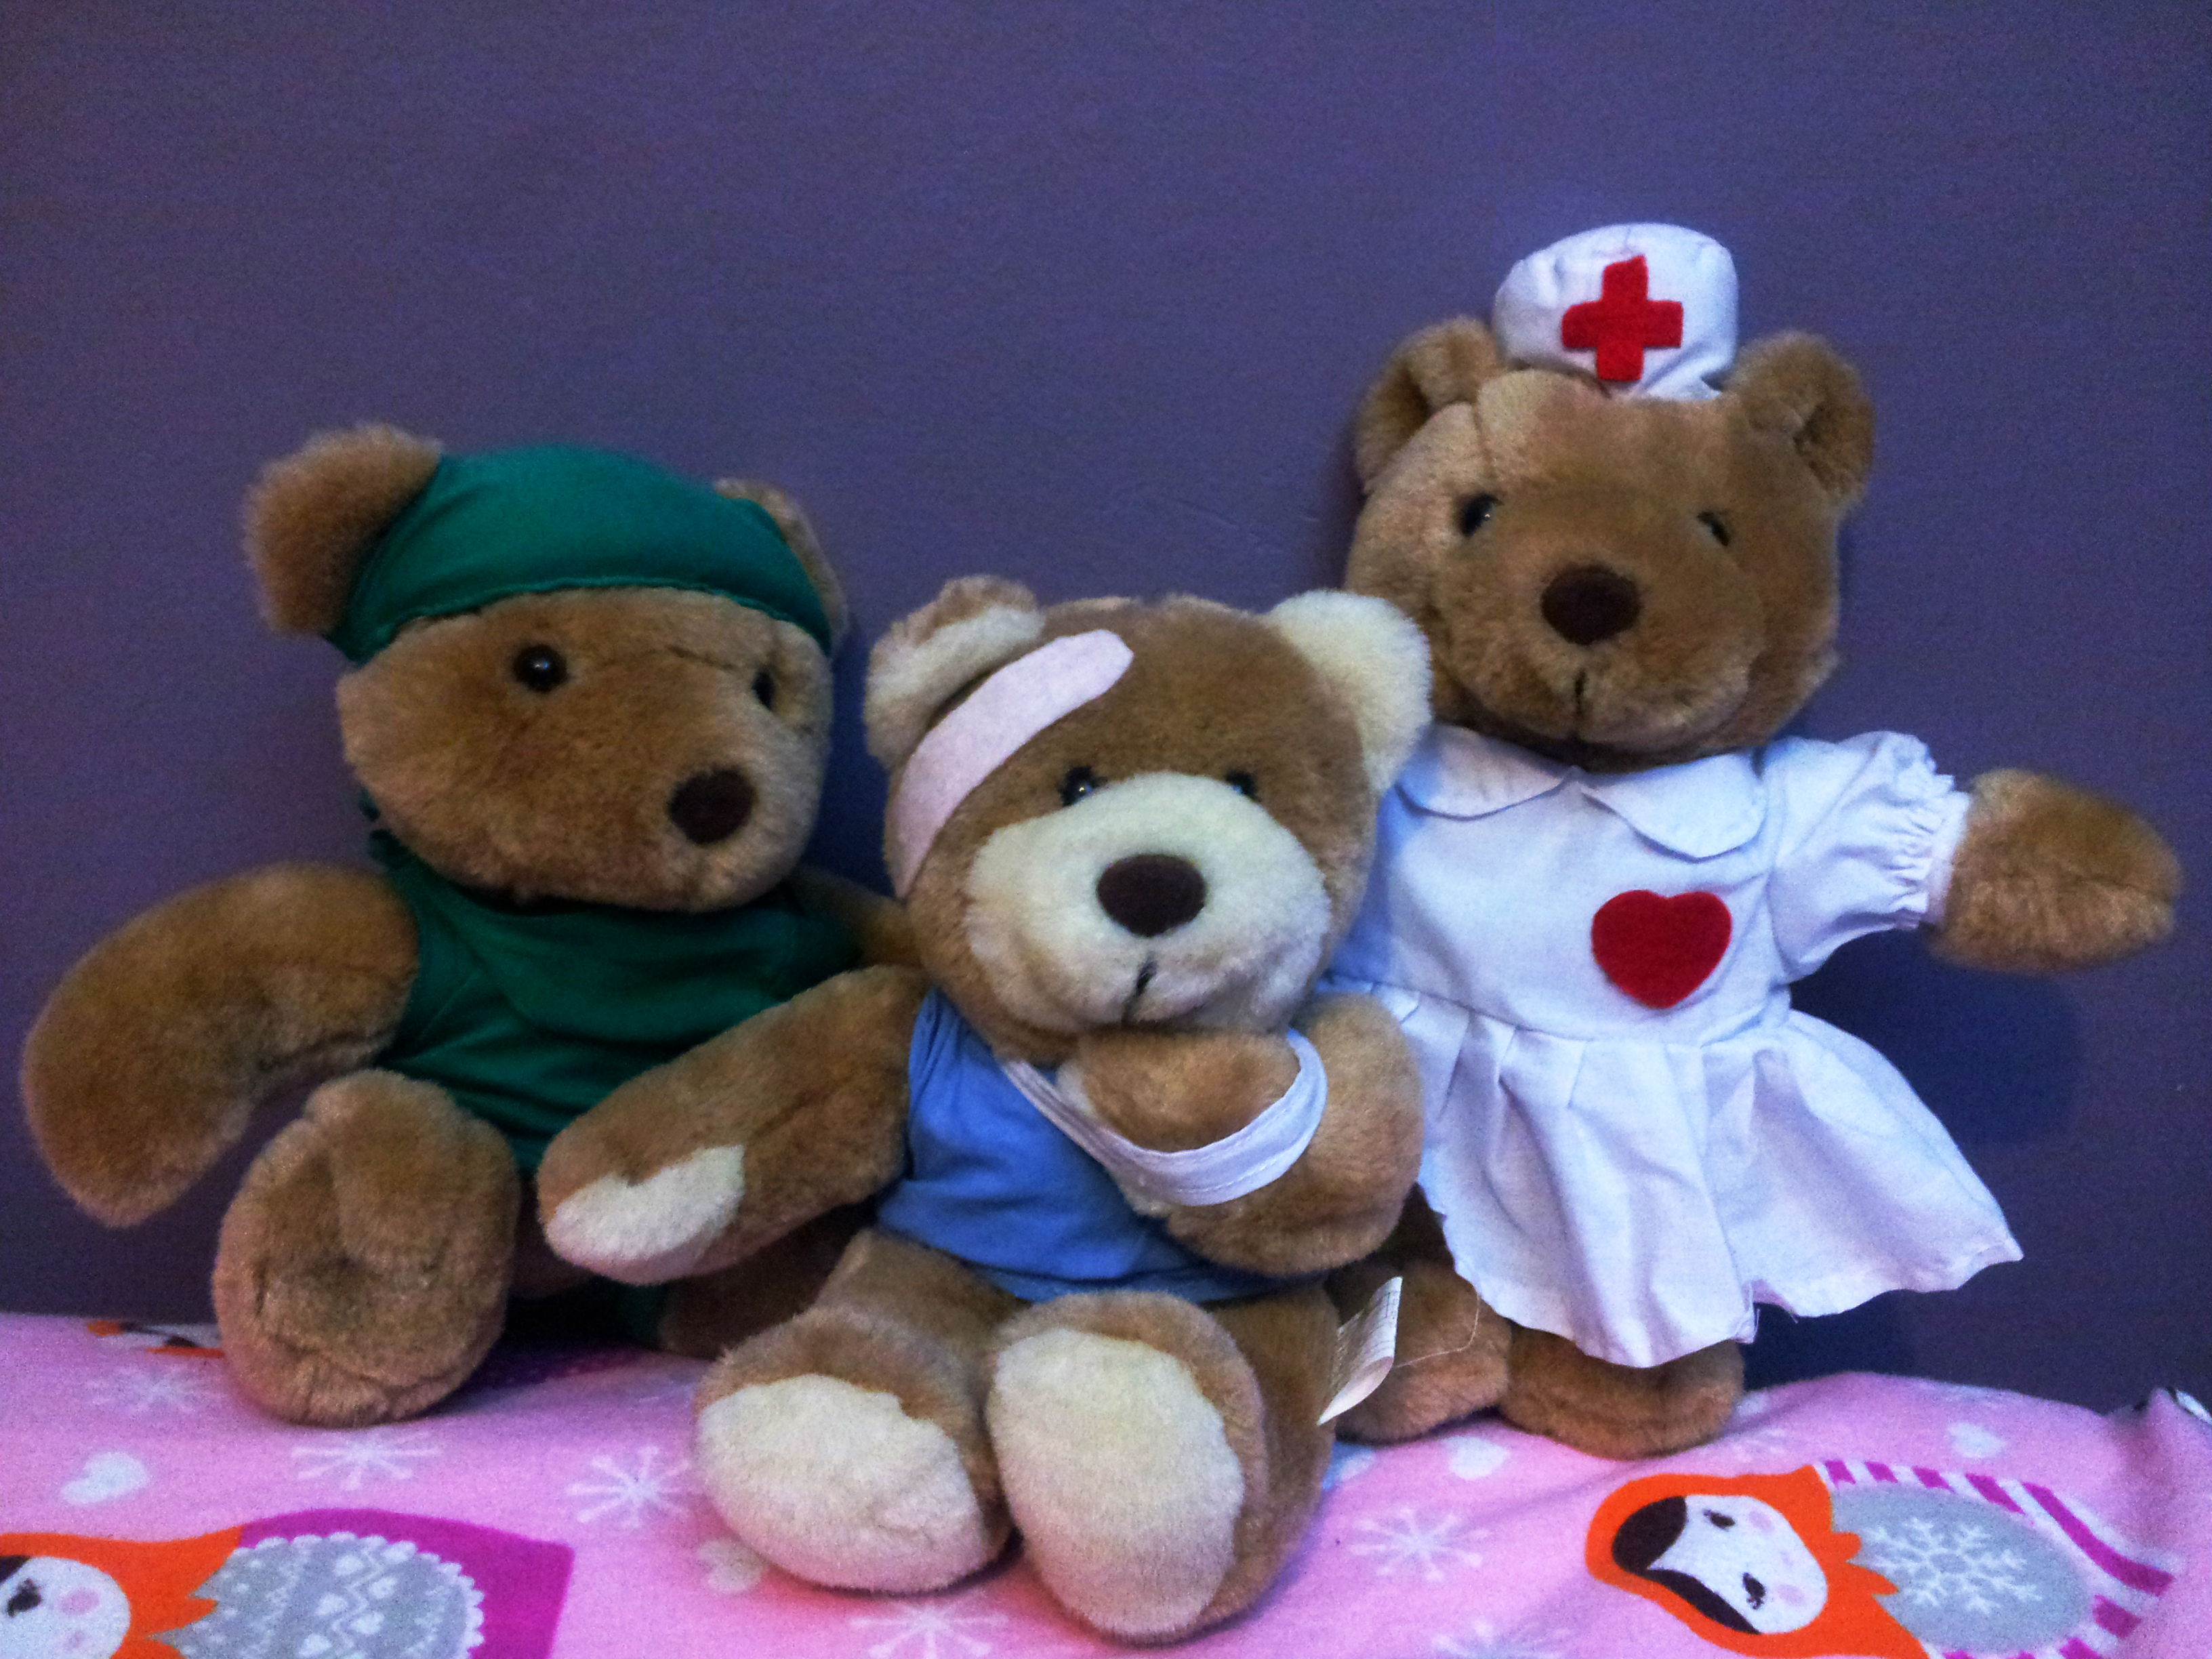 My set of hospital bears that were gifted to me during one of my extended visits.